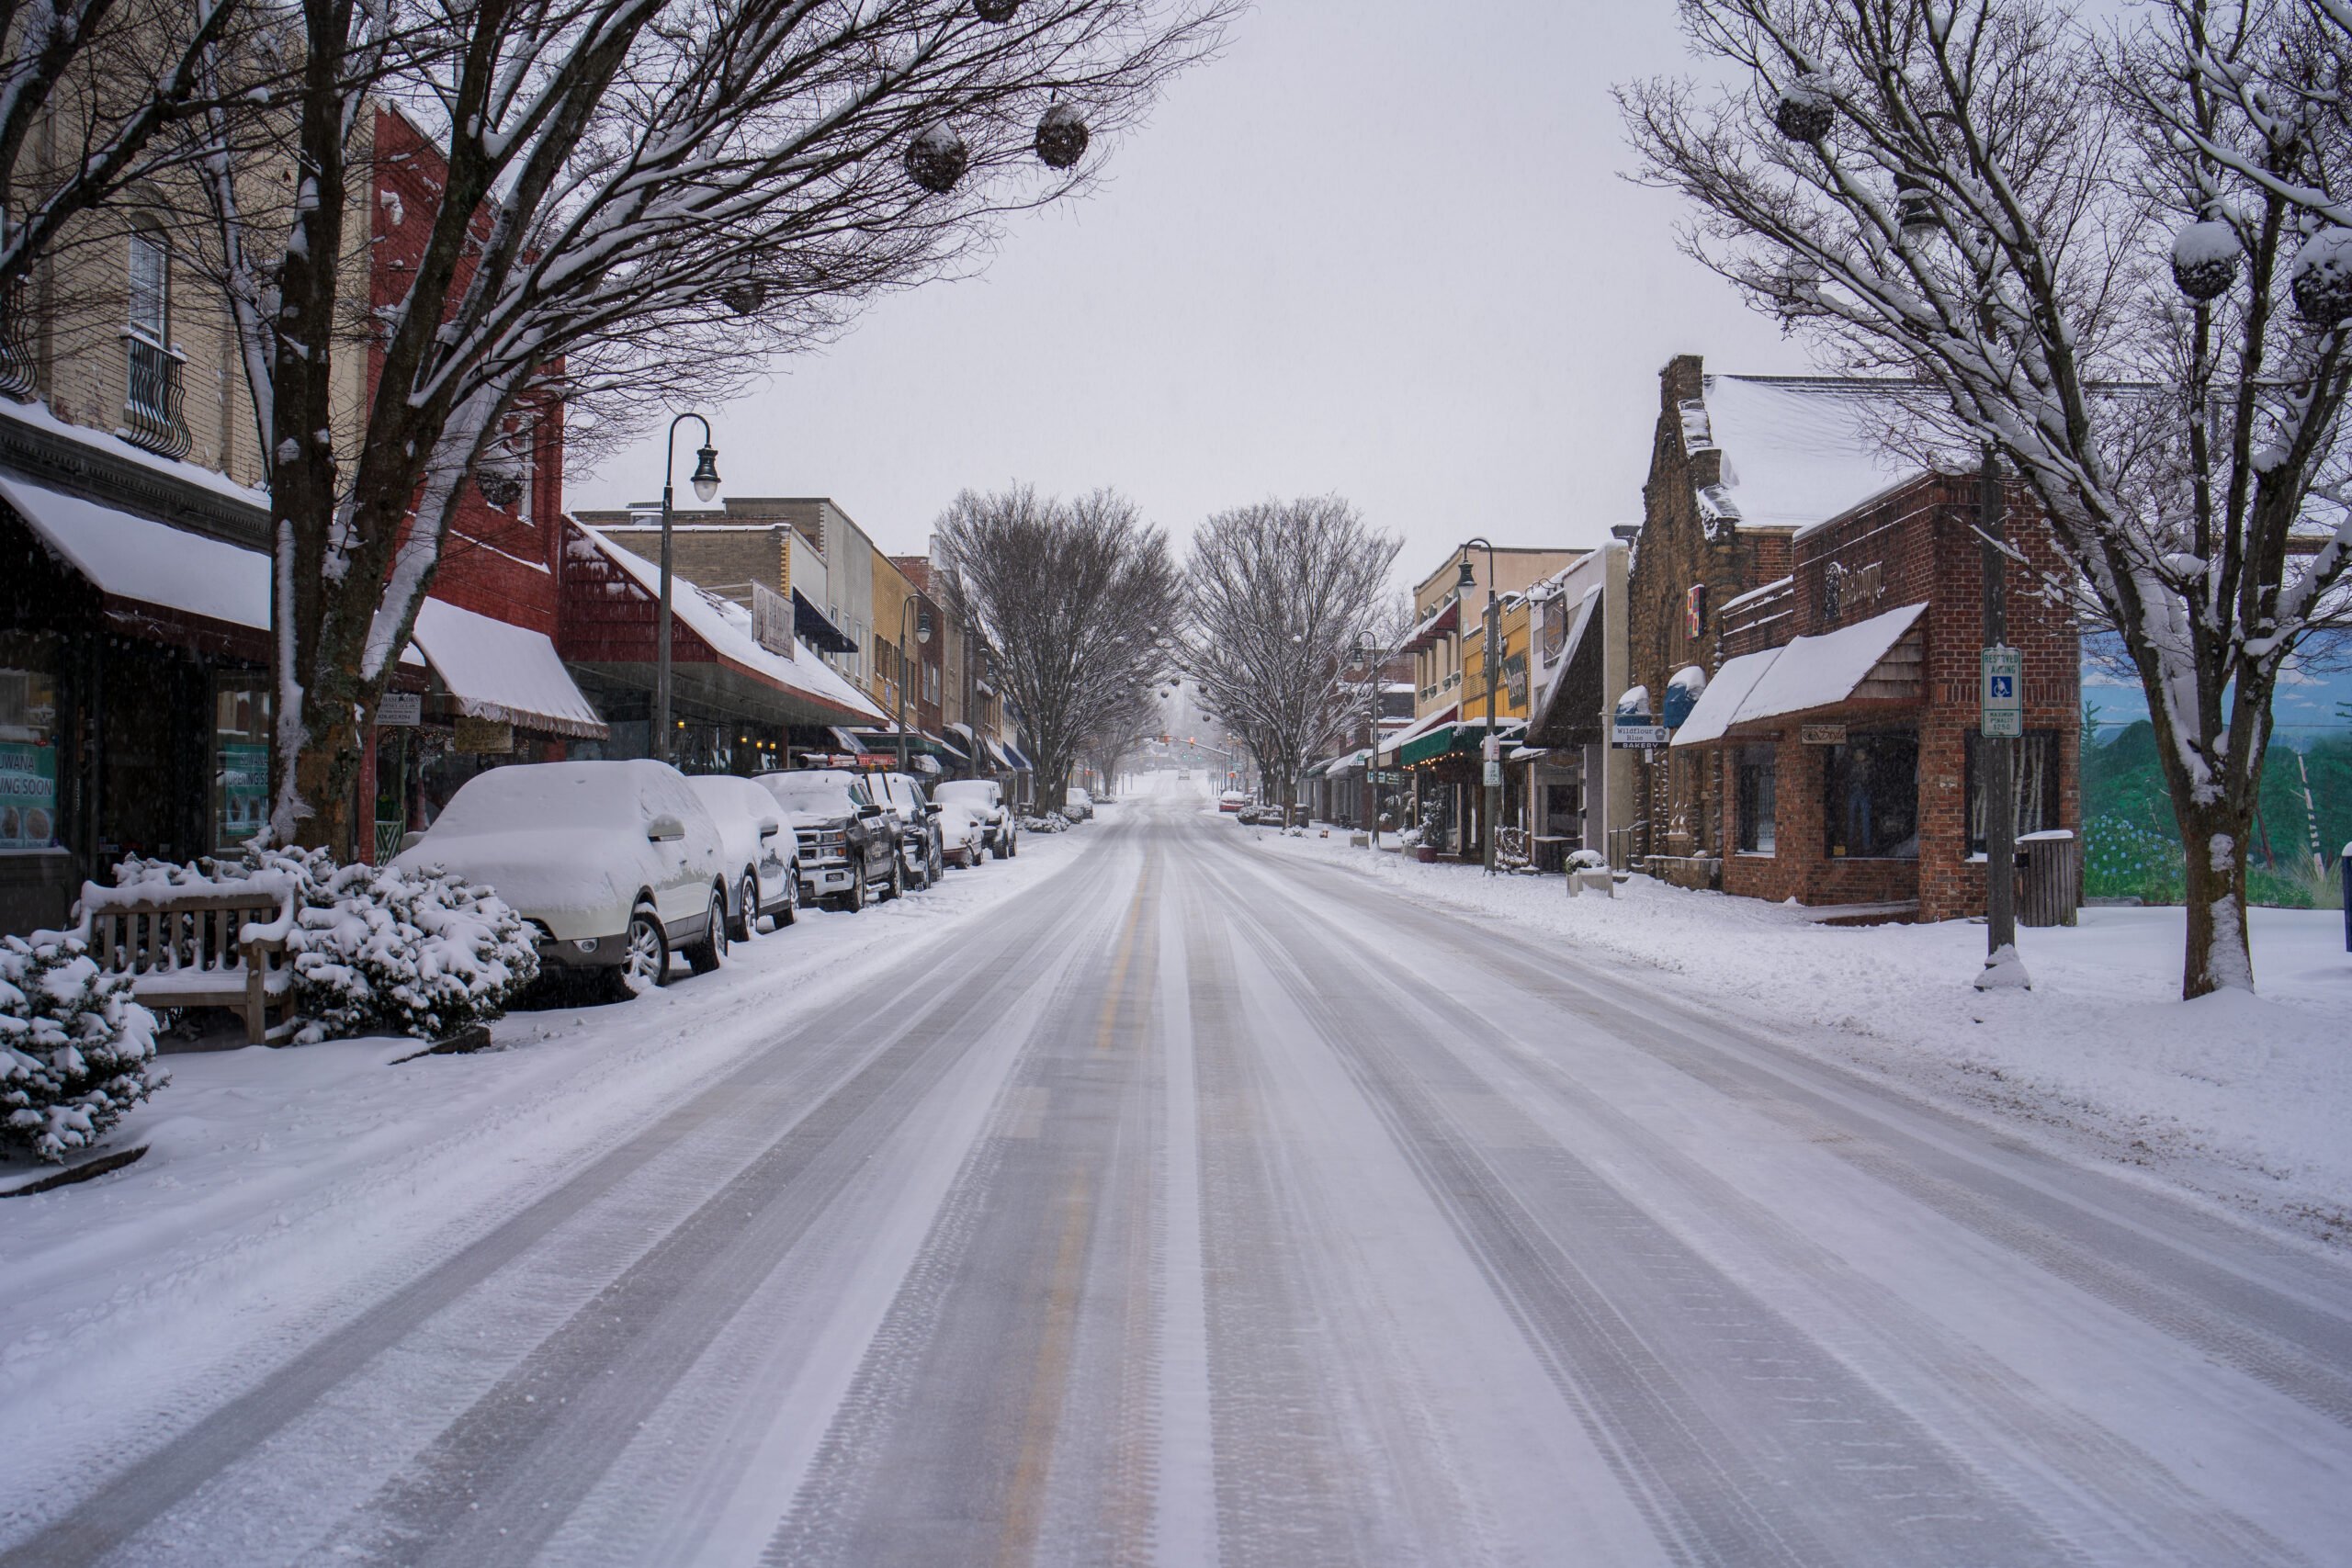 Downtown Waynesville in the snow